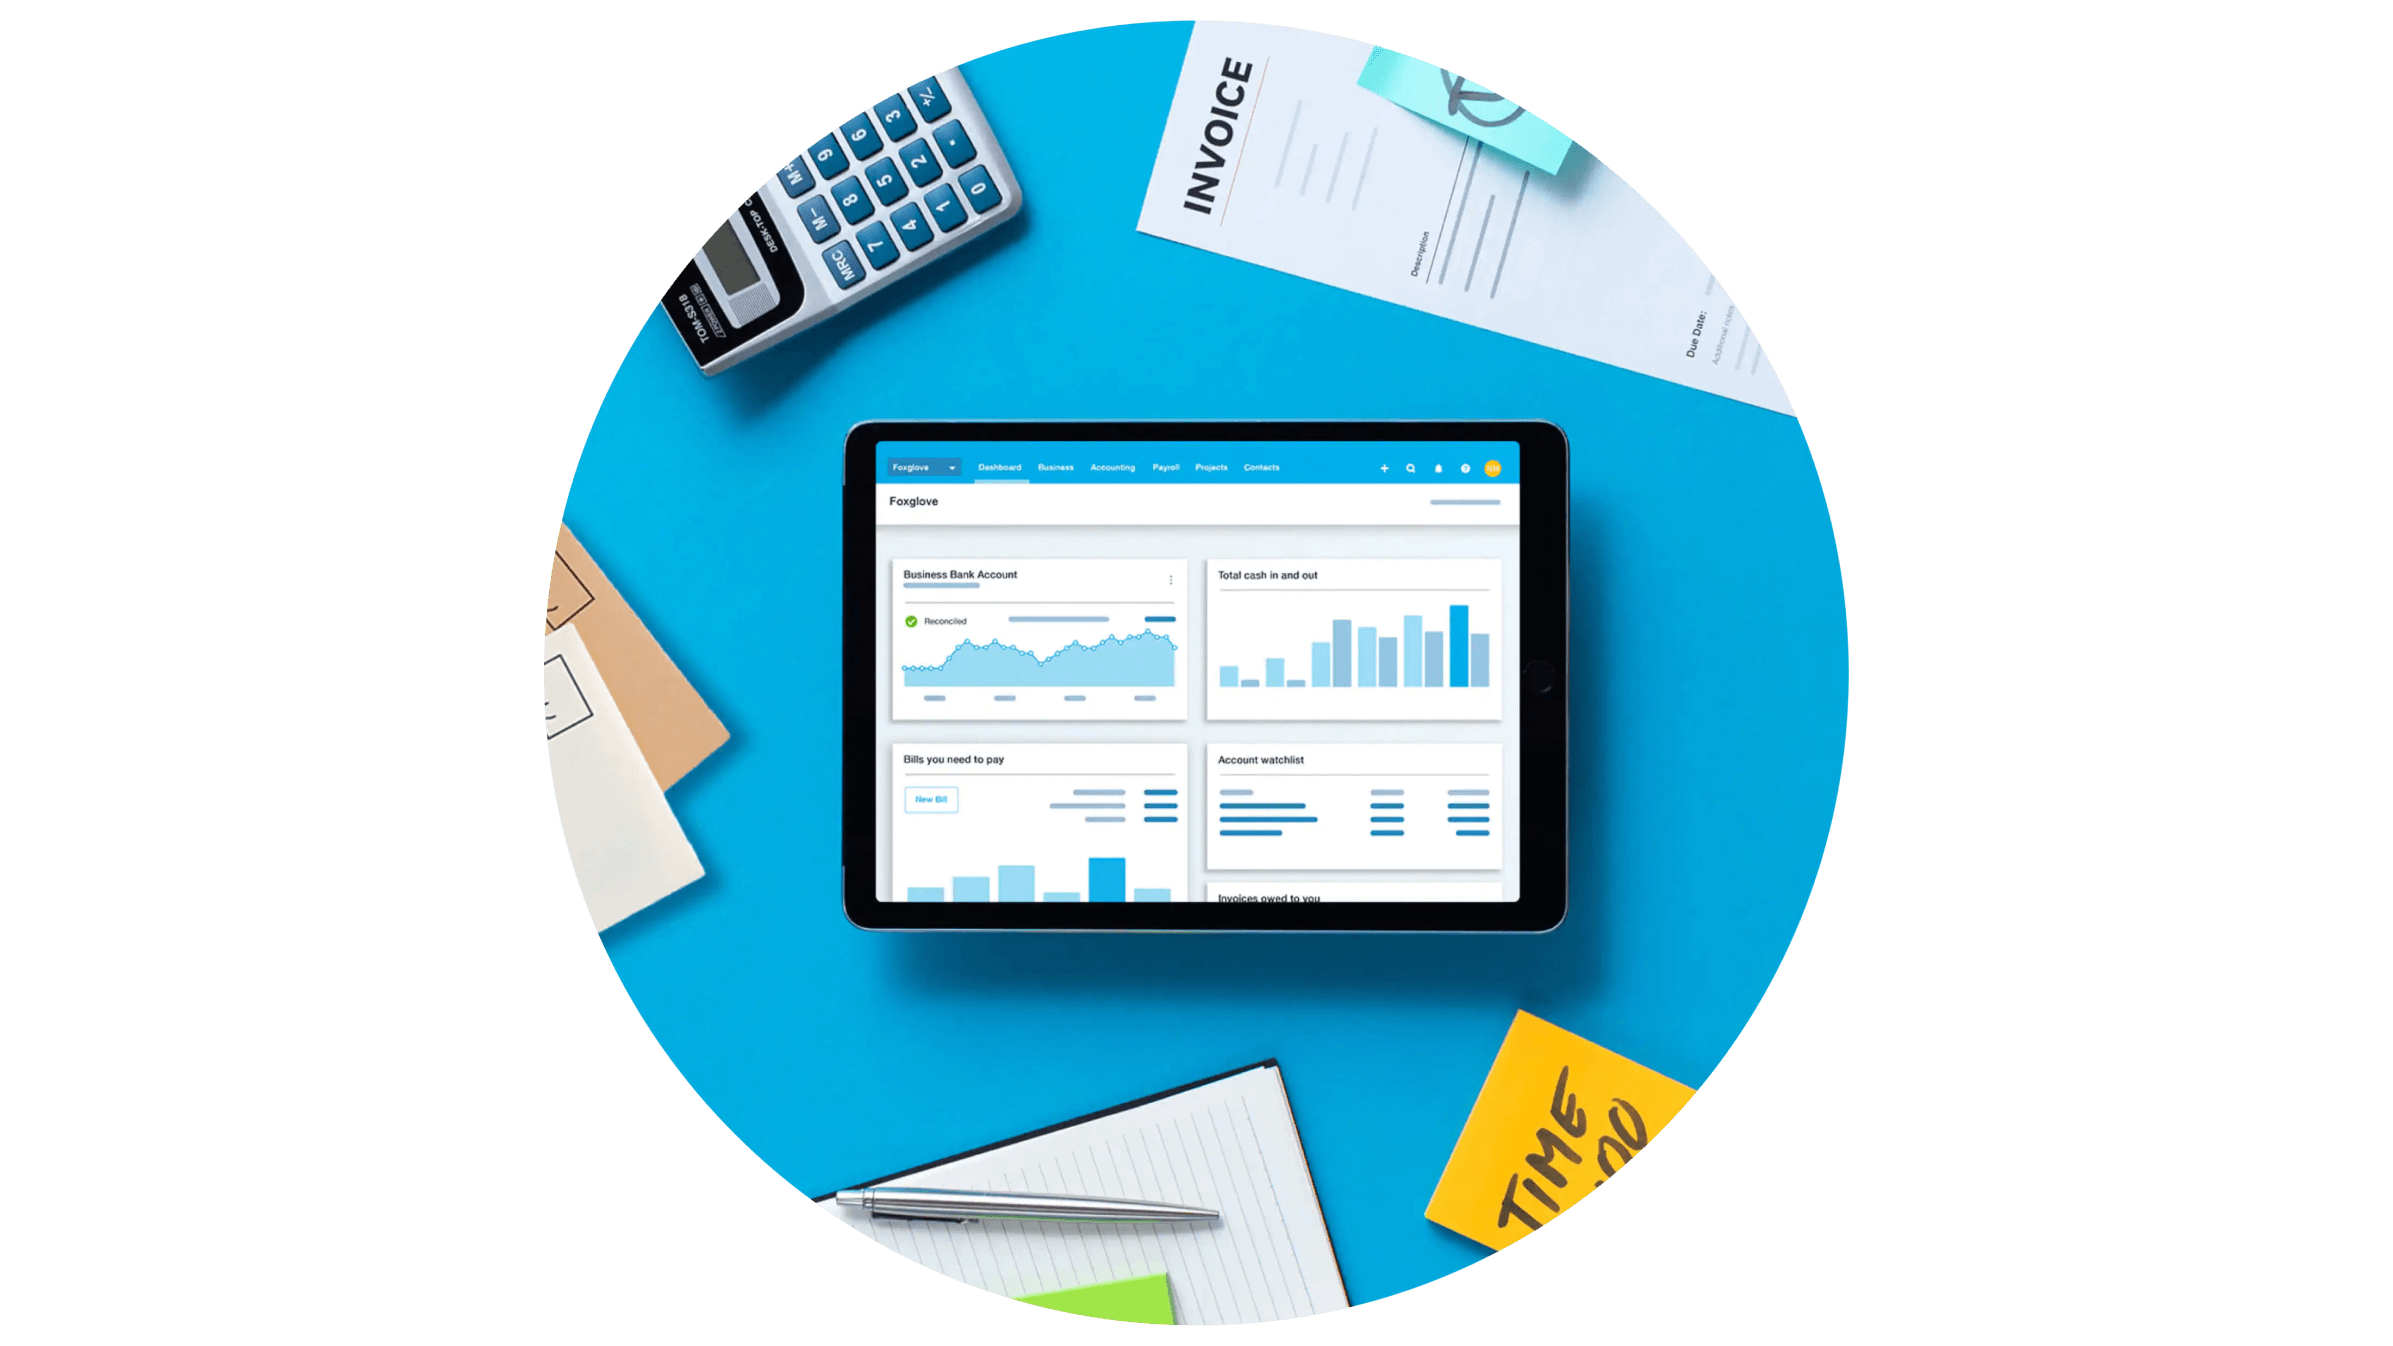 Xero display on a notepad device. Xero comes with many support resources, making your team and accounting management easy.